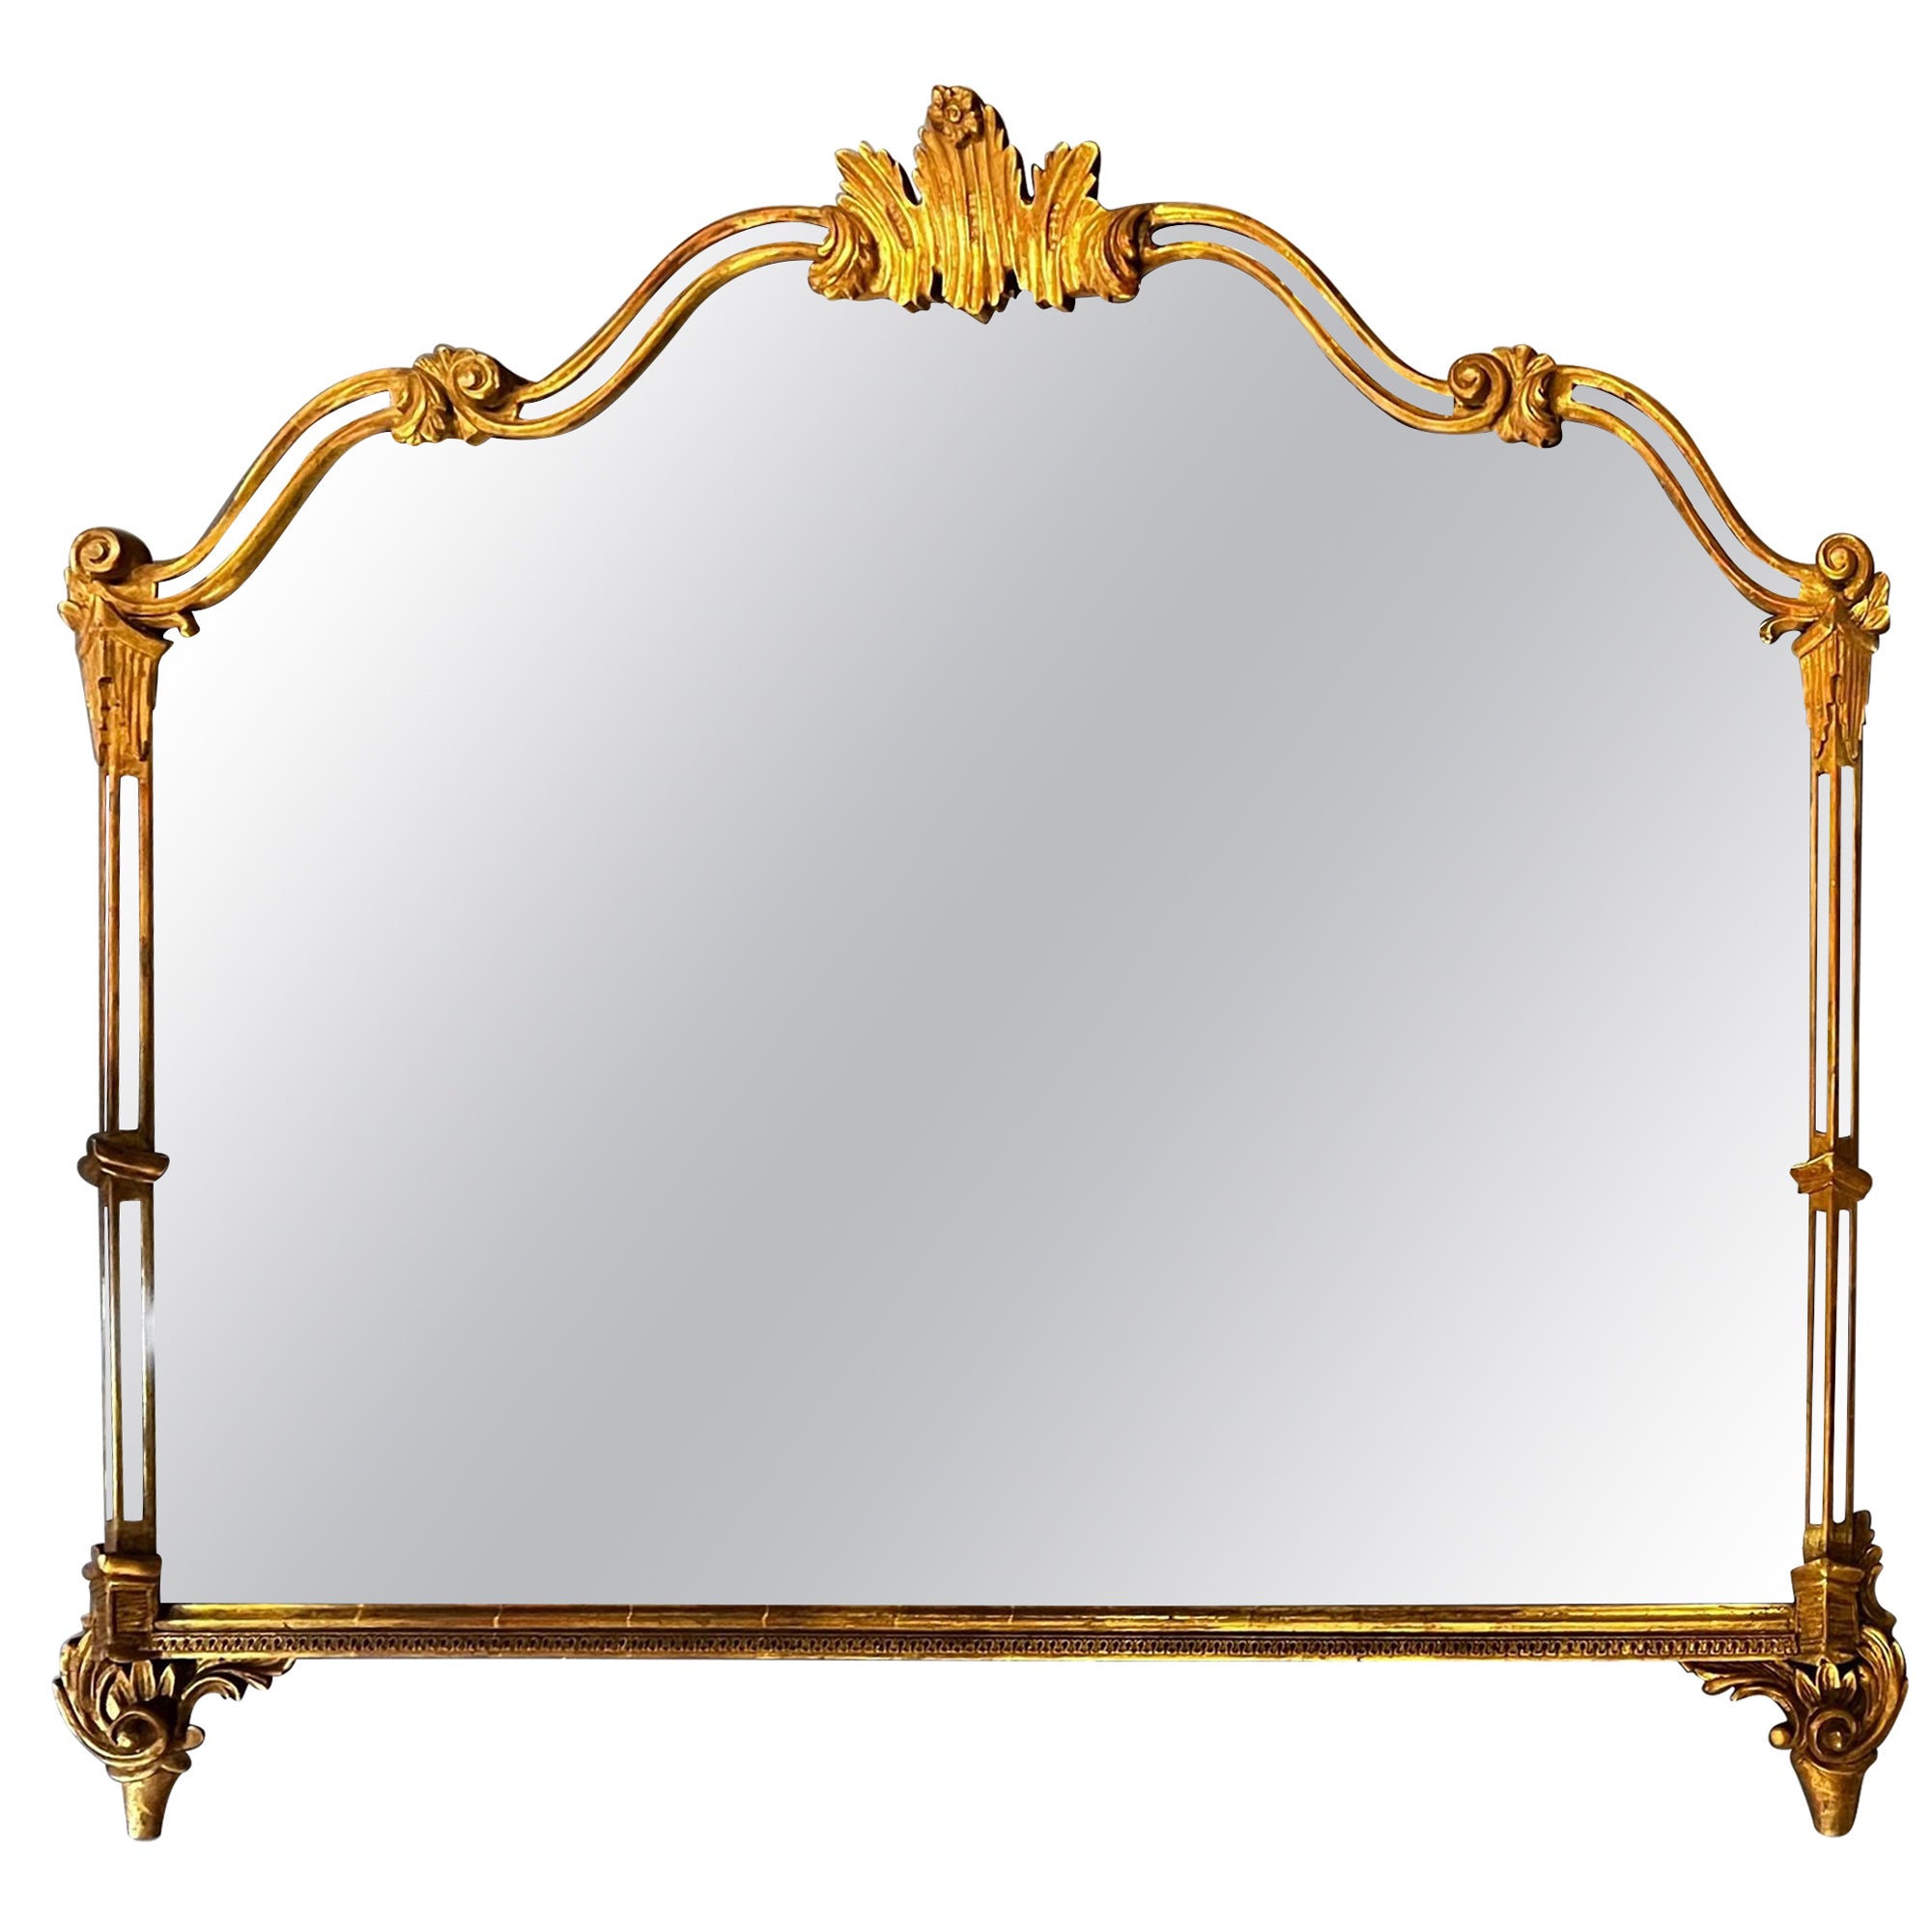 A Giltwood Over the Mantel, Console or Wall Mirror, Regency Style, Italian